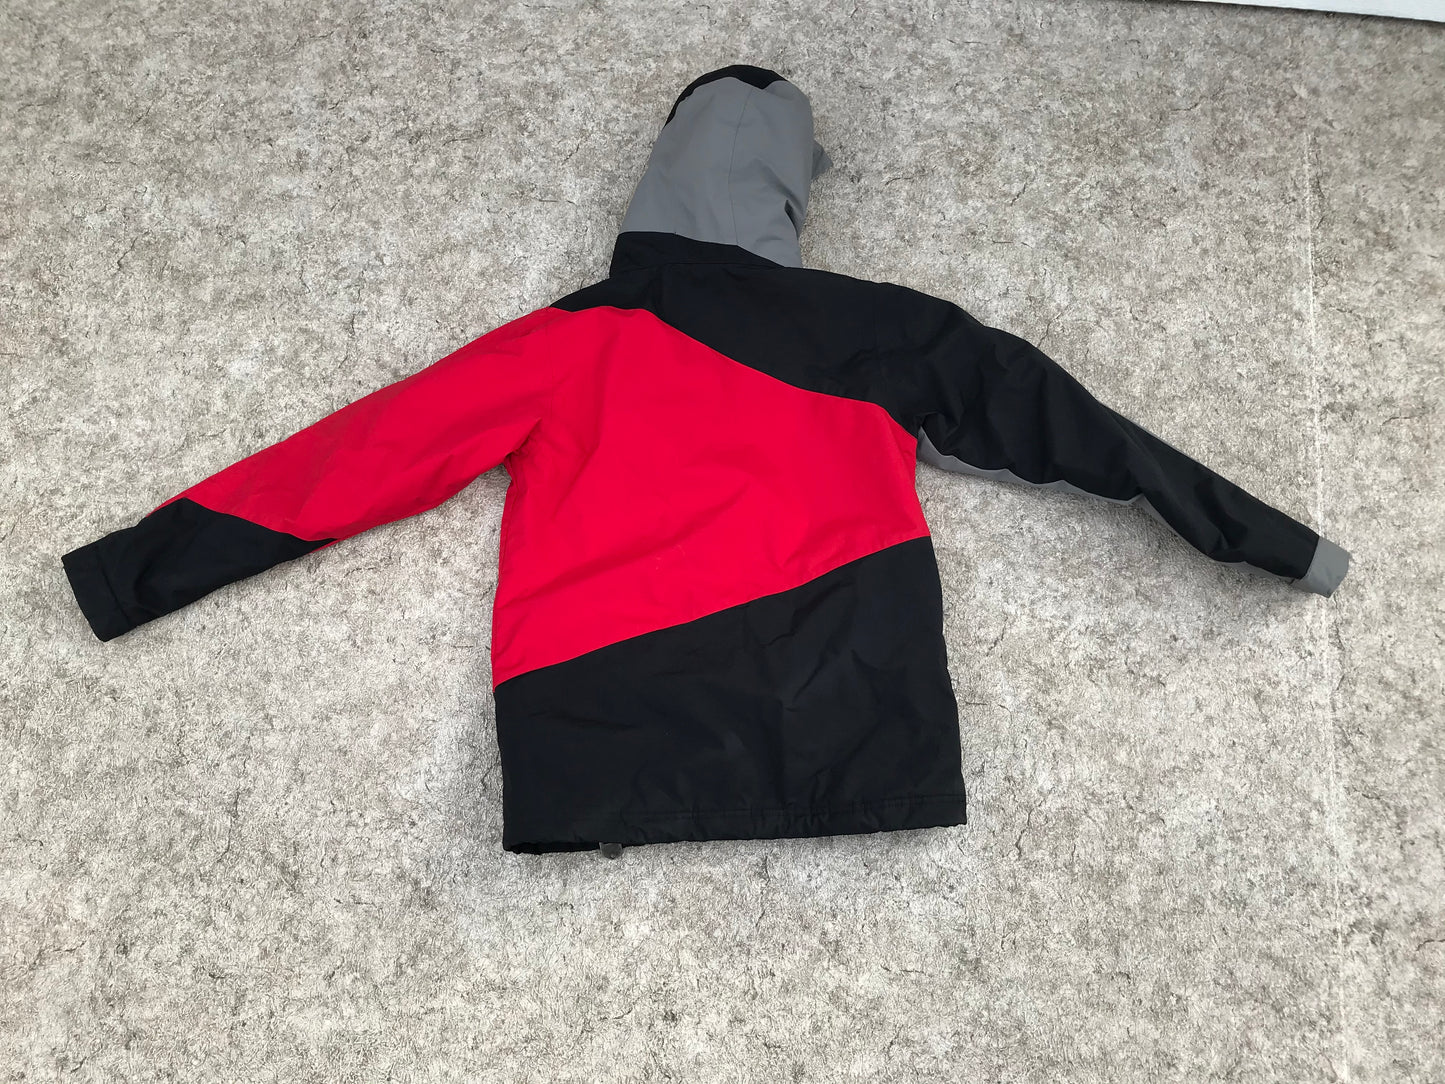 Winter Coat Child Size 18 Youth X Large Burton With Snow Belt Black Red Grey Excellent